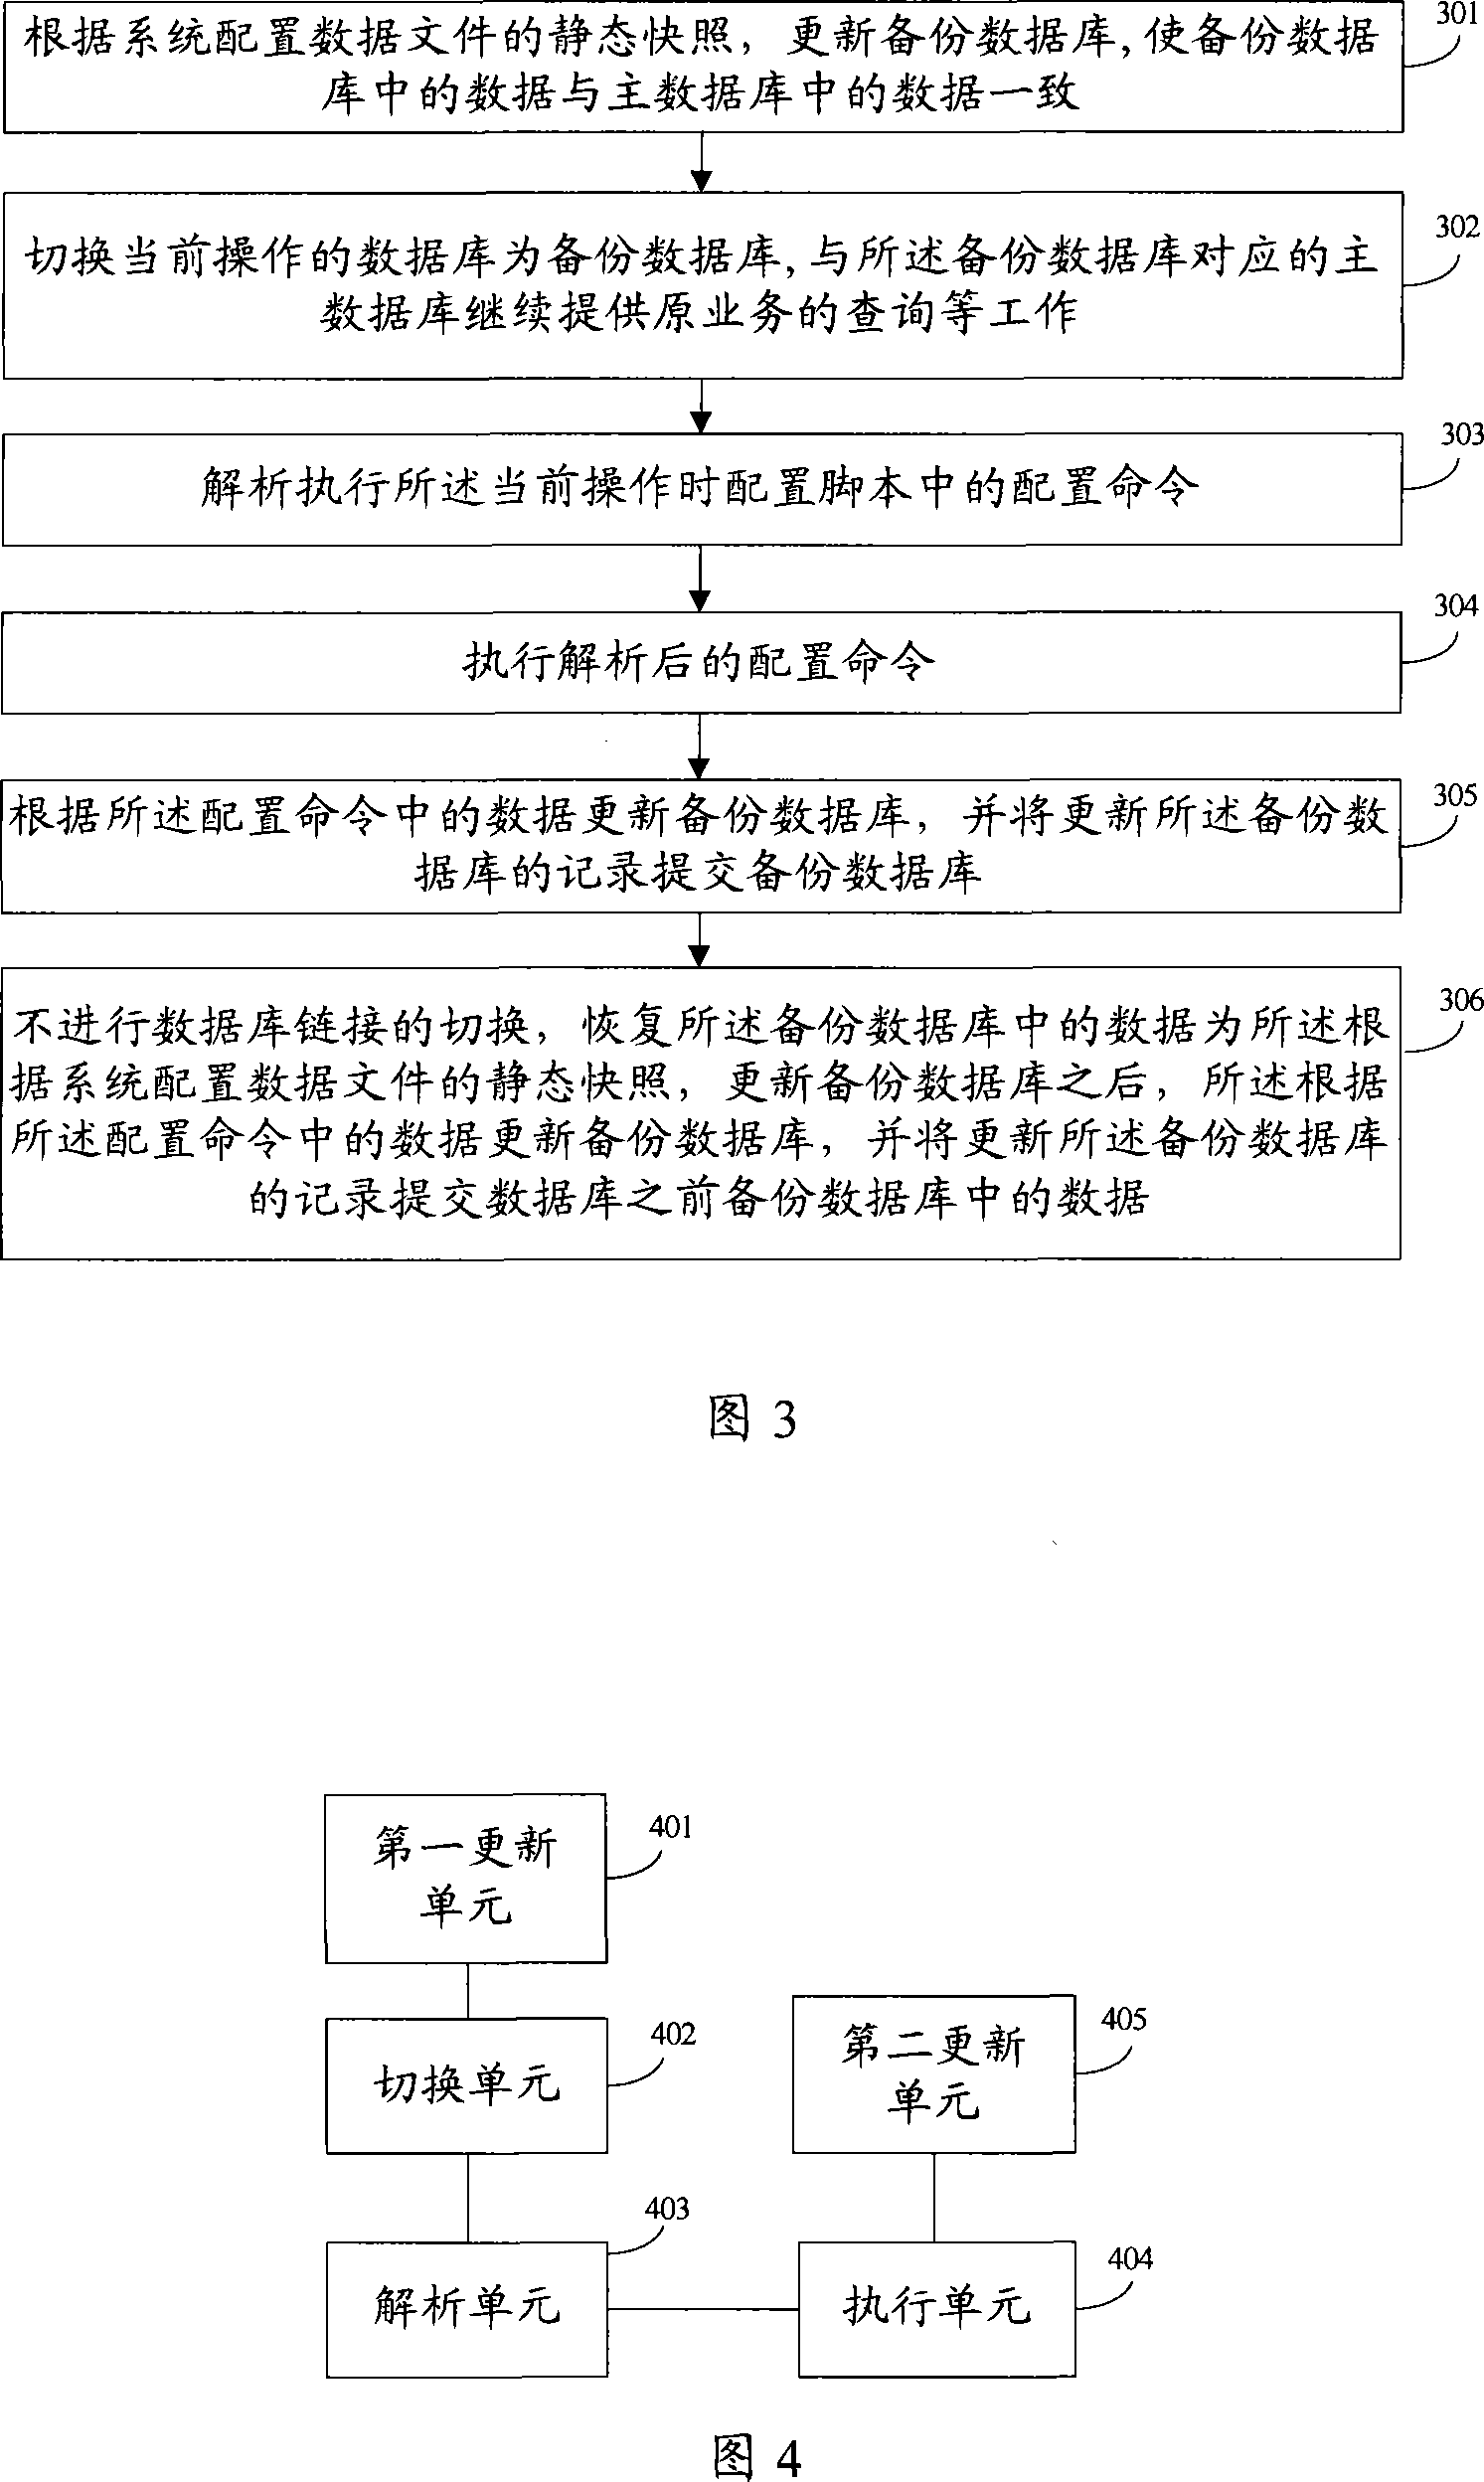 Method and apparatus for implementing preactivation of batch configuration